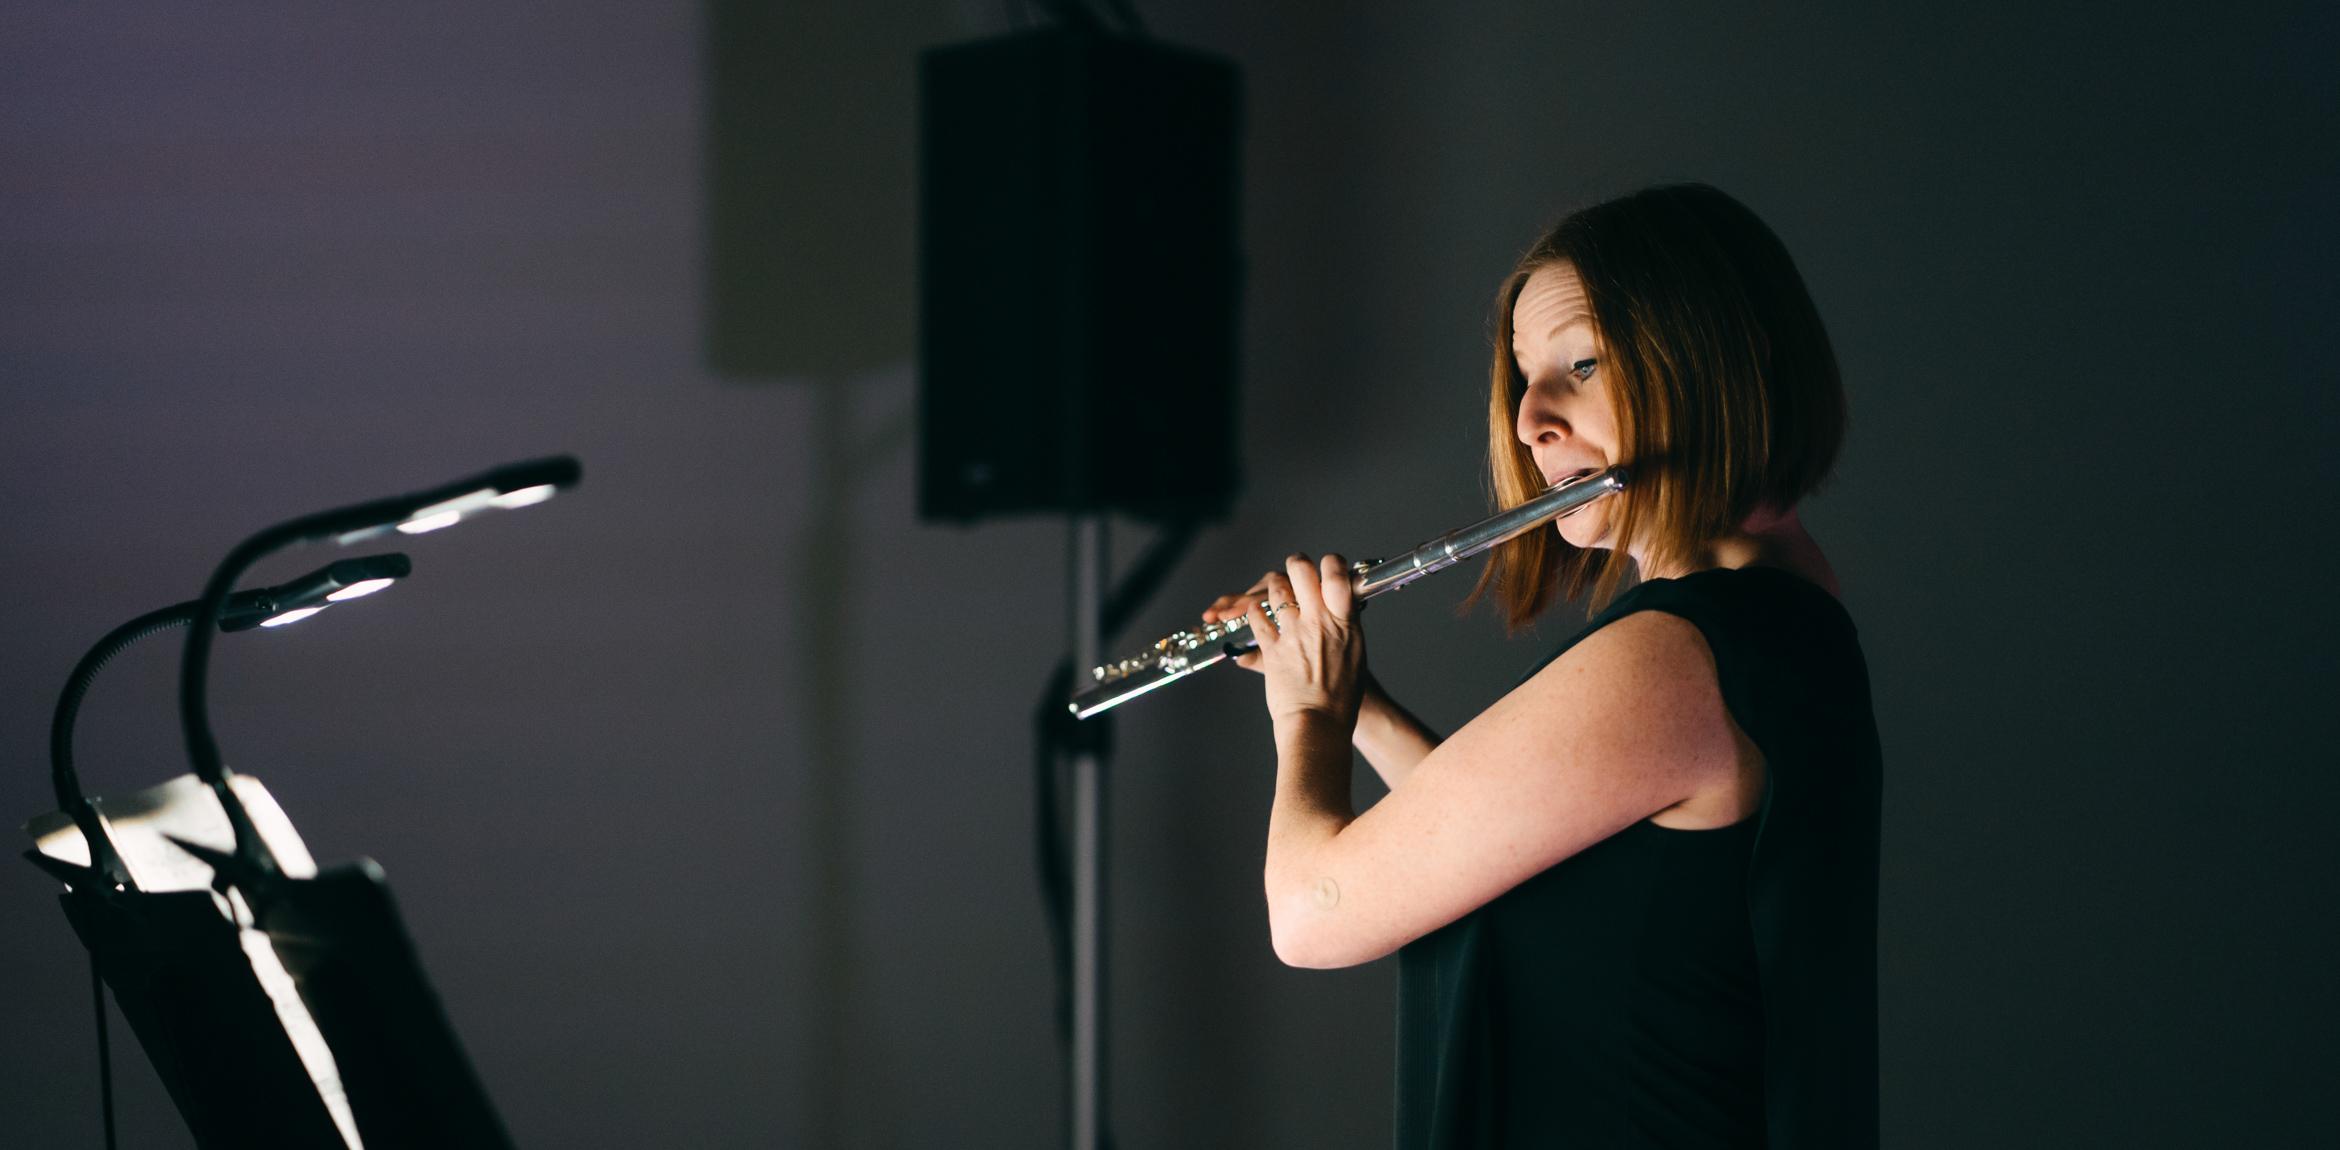 A flautist performs, lit by a music stand light.